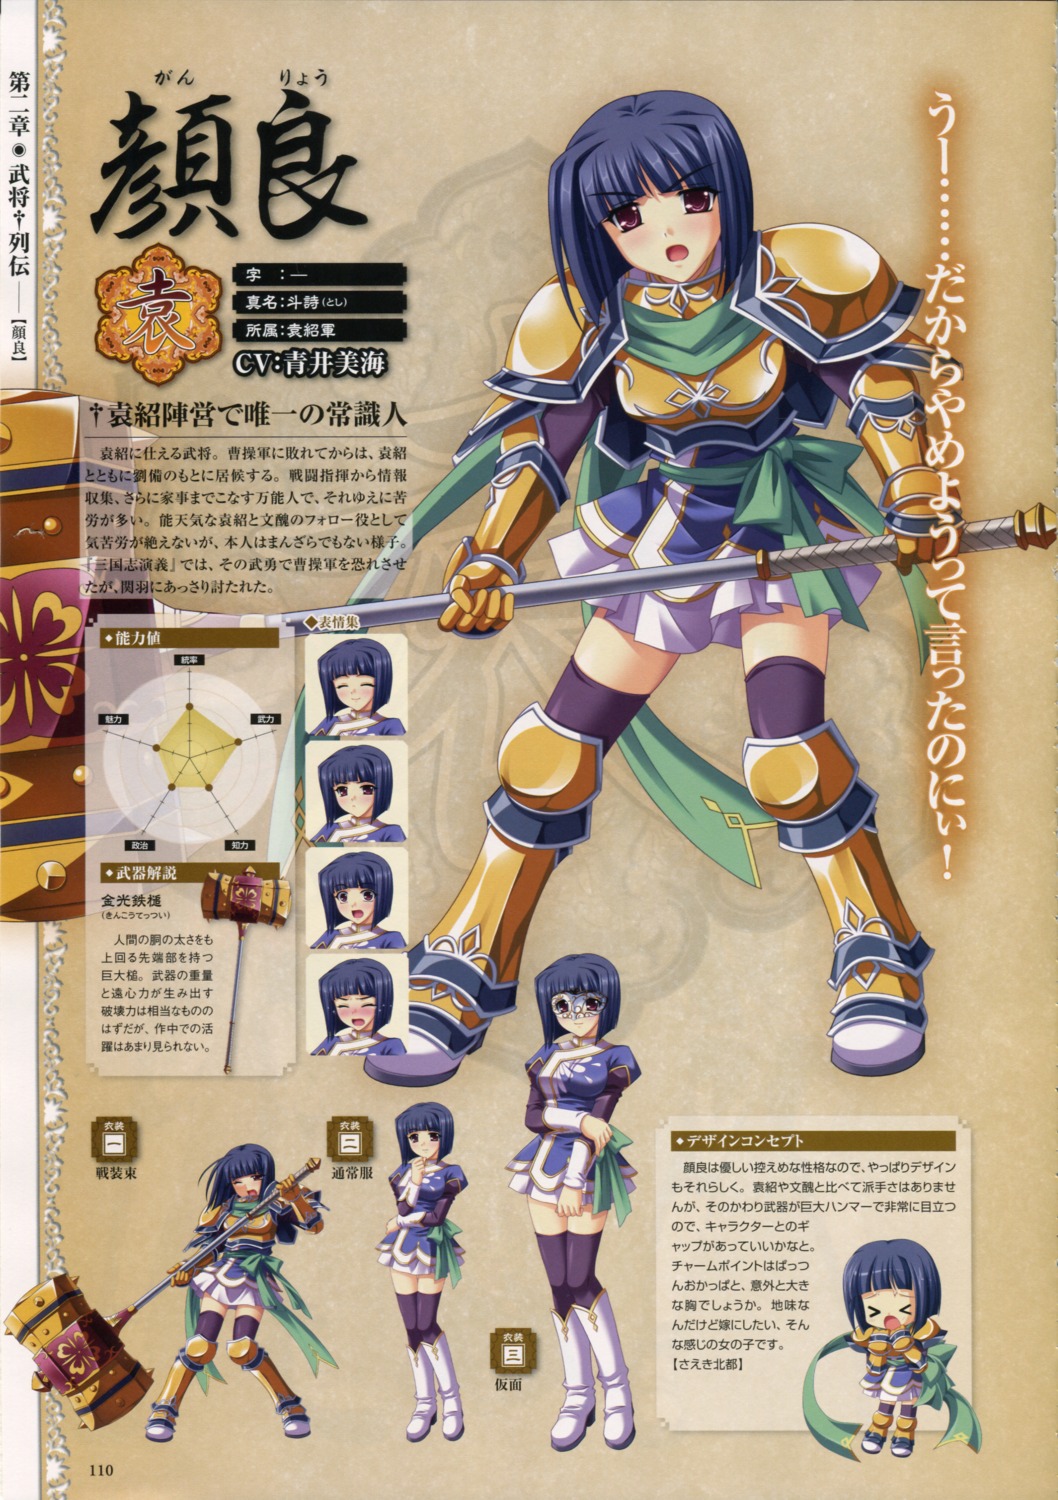 armor baseson character_design chibi expression ganryou koihime_musou profile_page thighhighs weapon